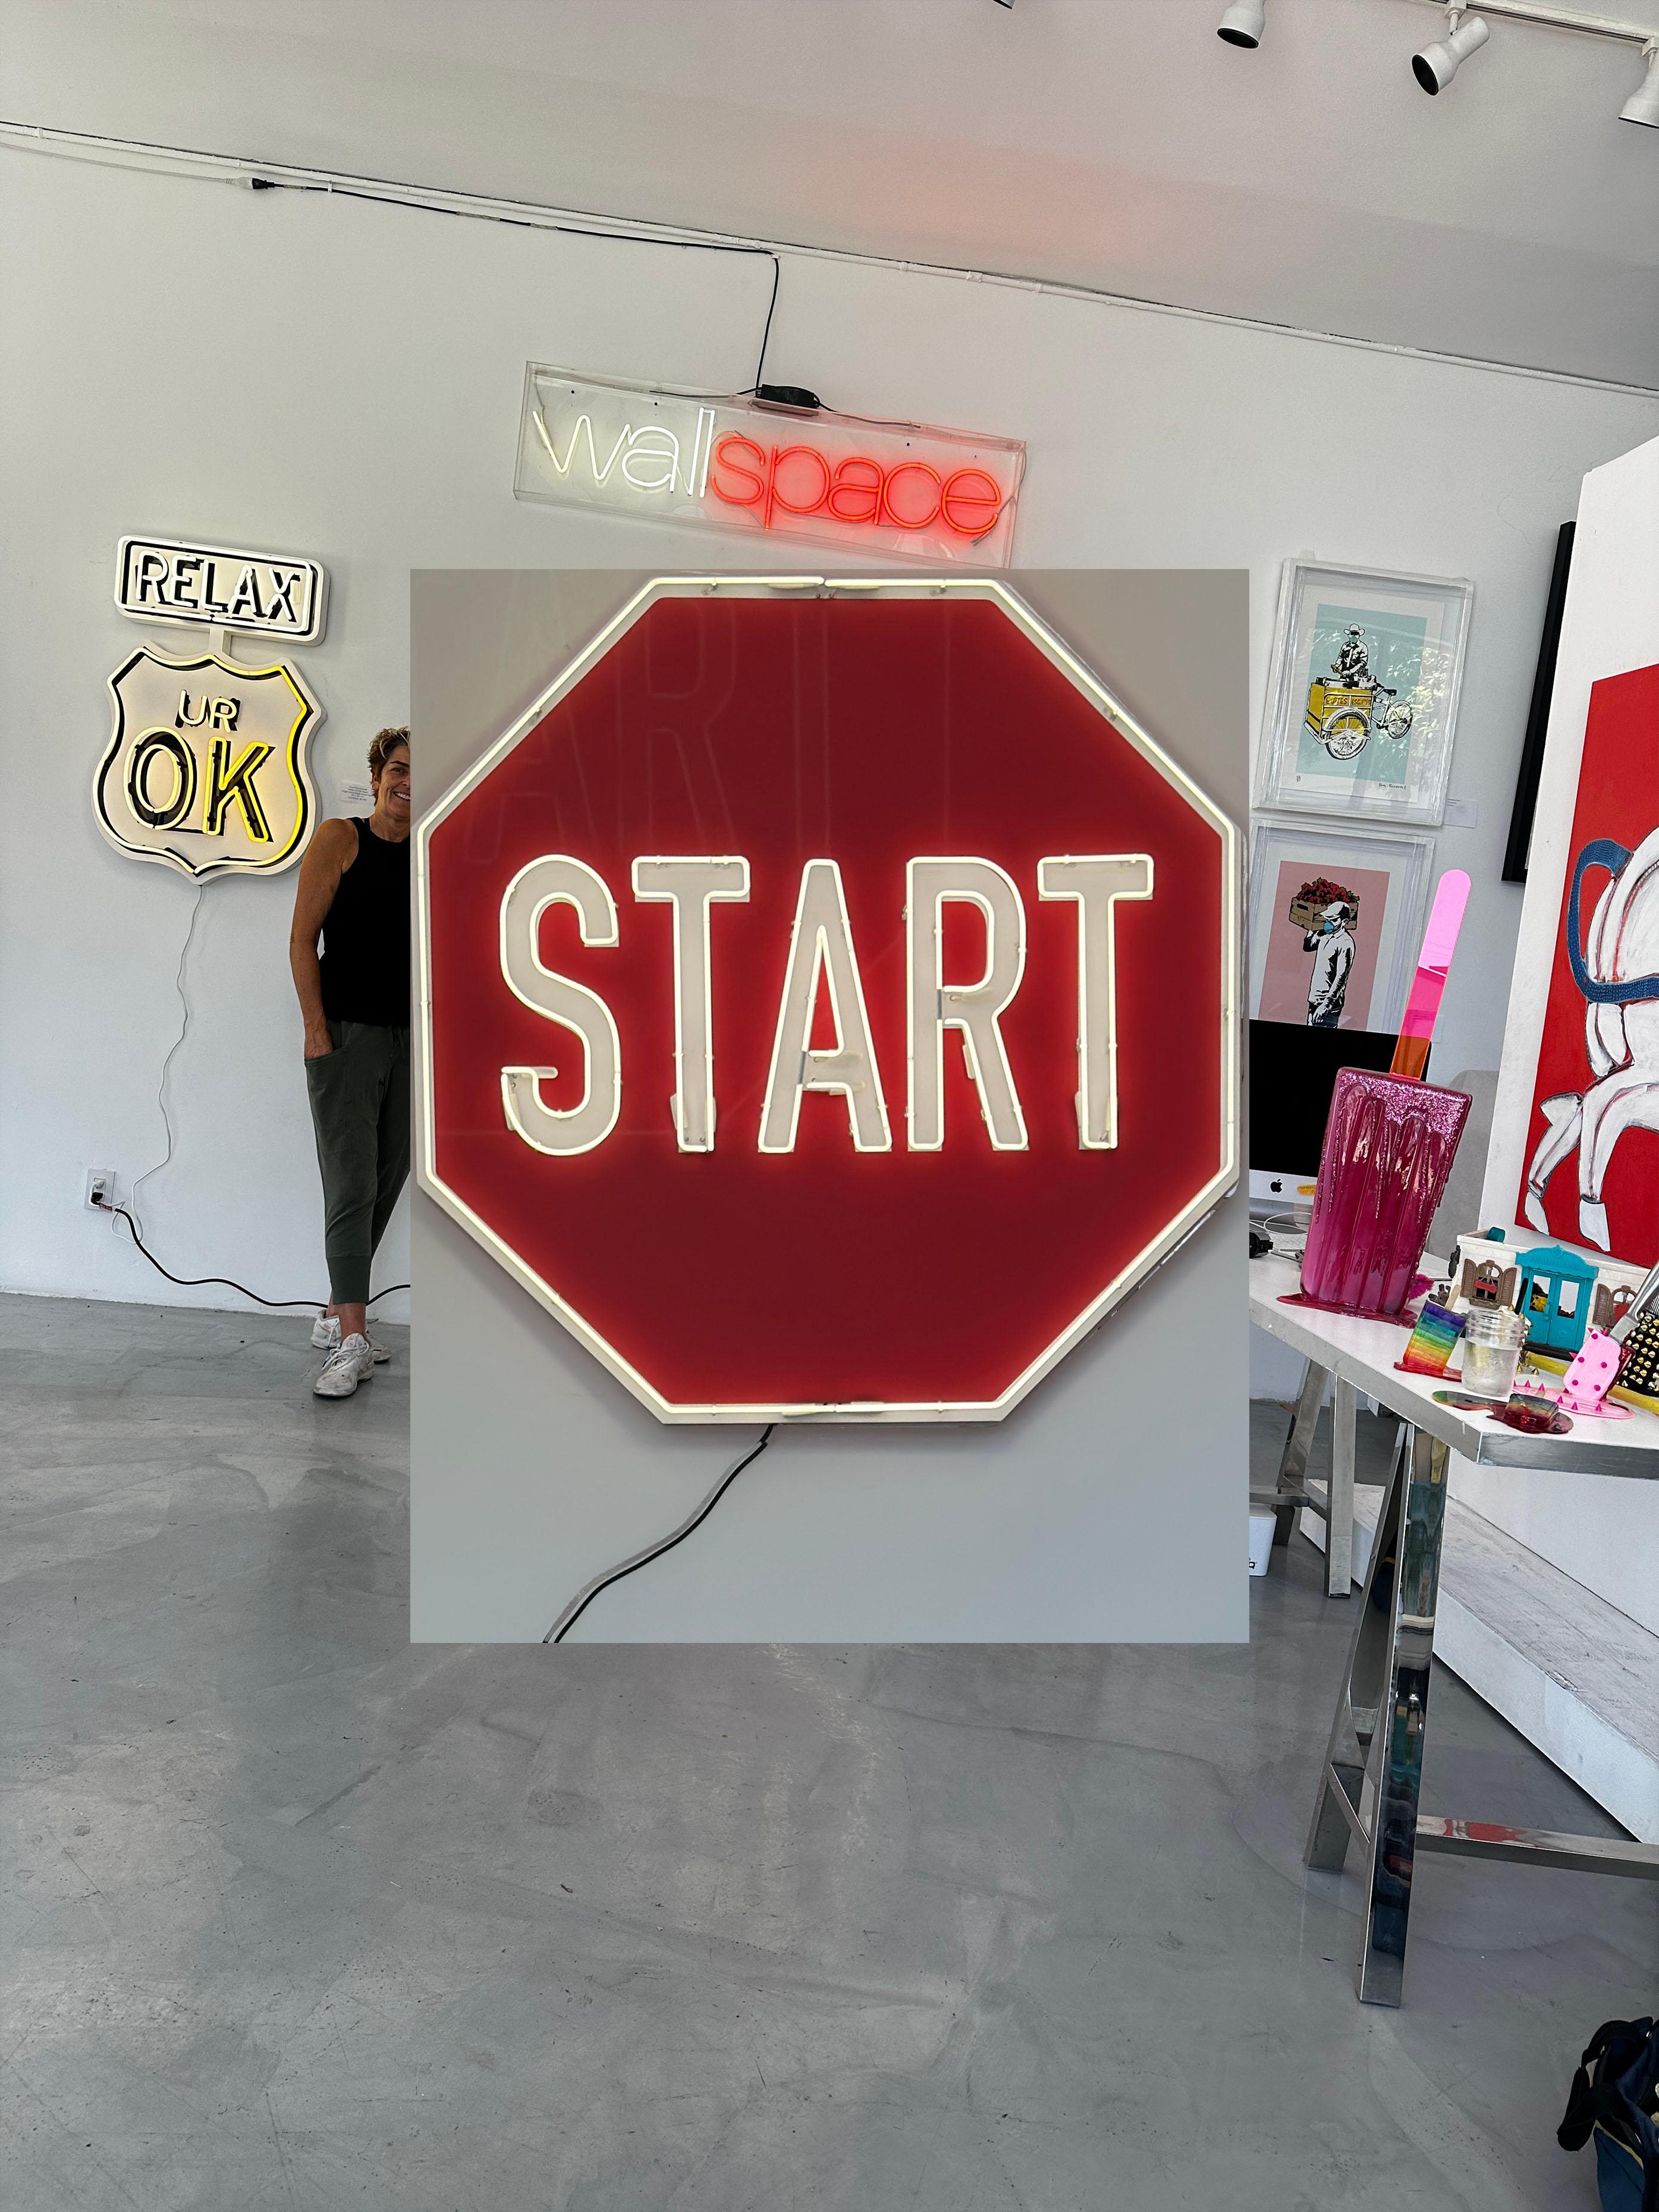 Using the institutionalized structure of road signage as inspiration, artist Scott Froschauer’s, START surprise and delight viewers by replacing the traditionally negative and coercive language with positivity and inspiration. As a reaction to our